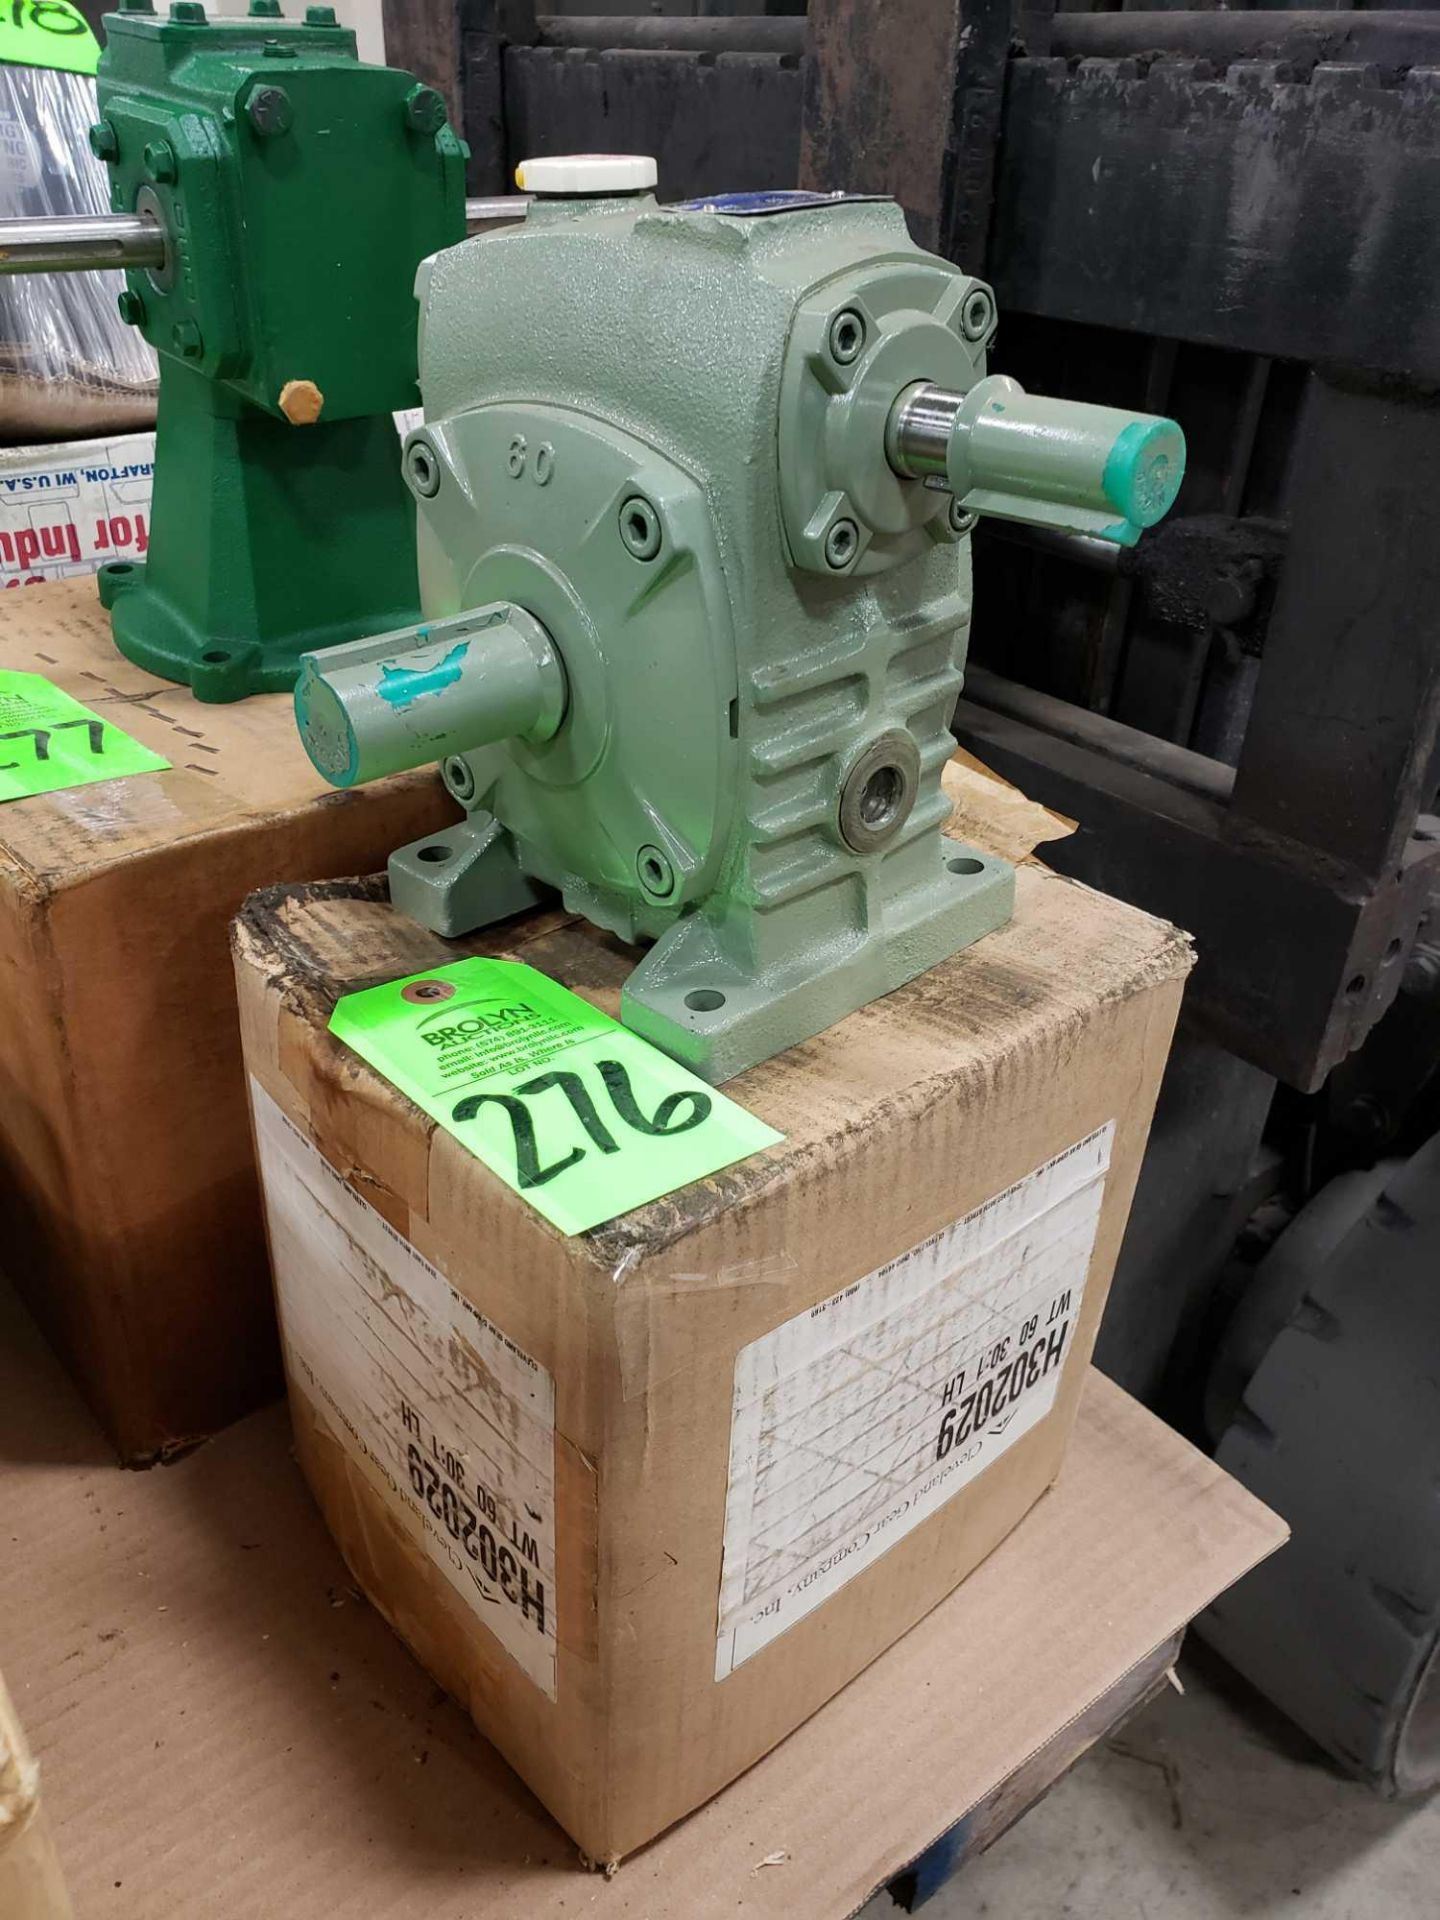 Cleveland speed reducer gear box type WT. Size 60, ratio 30:1. New in box.